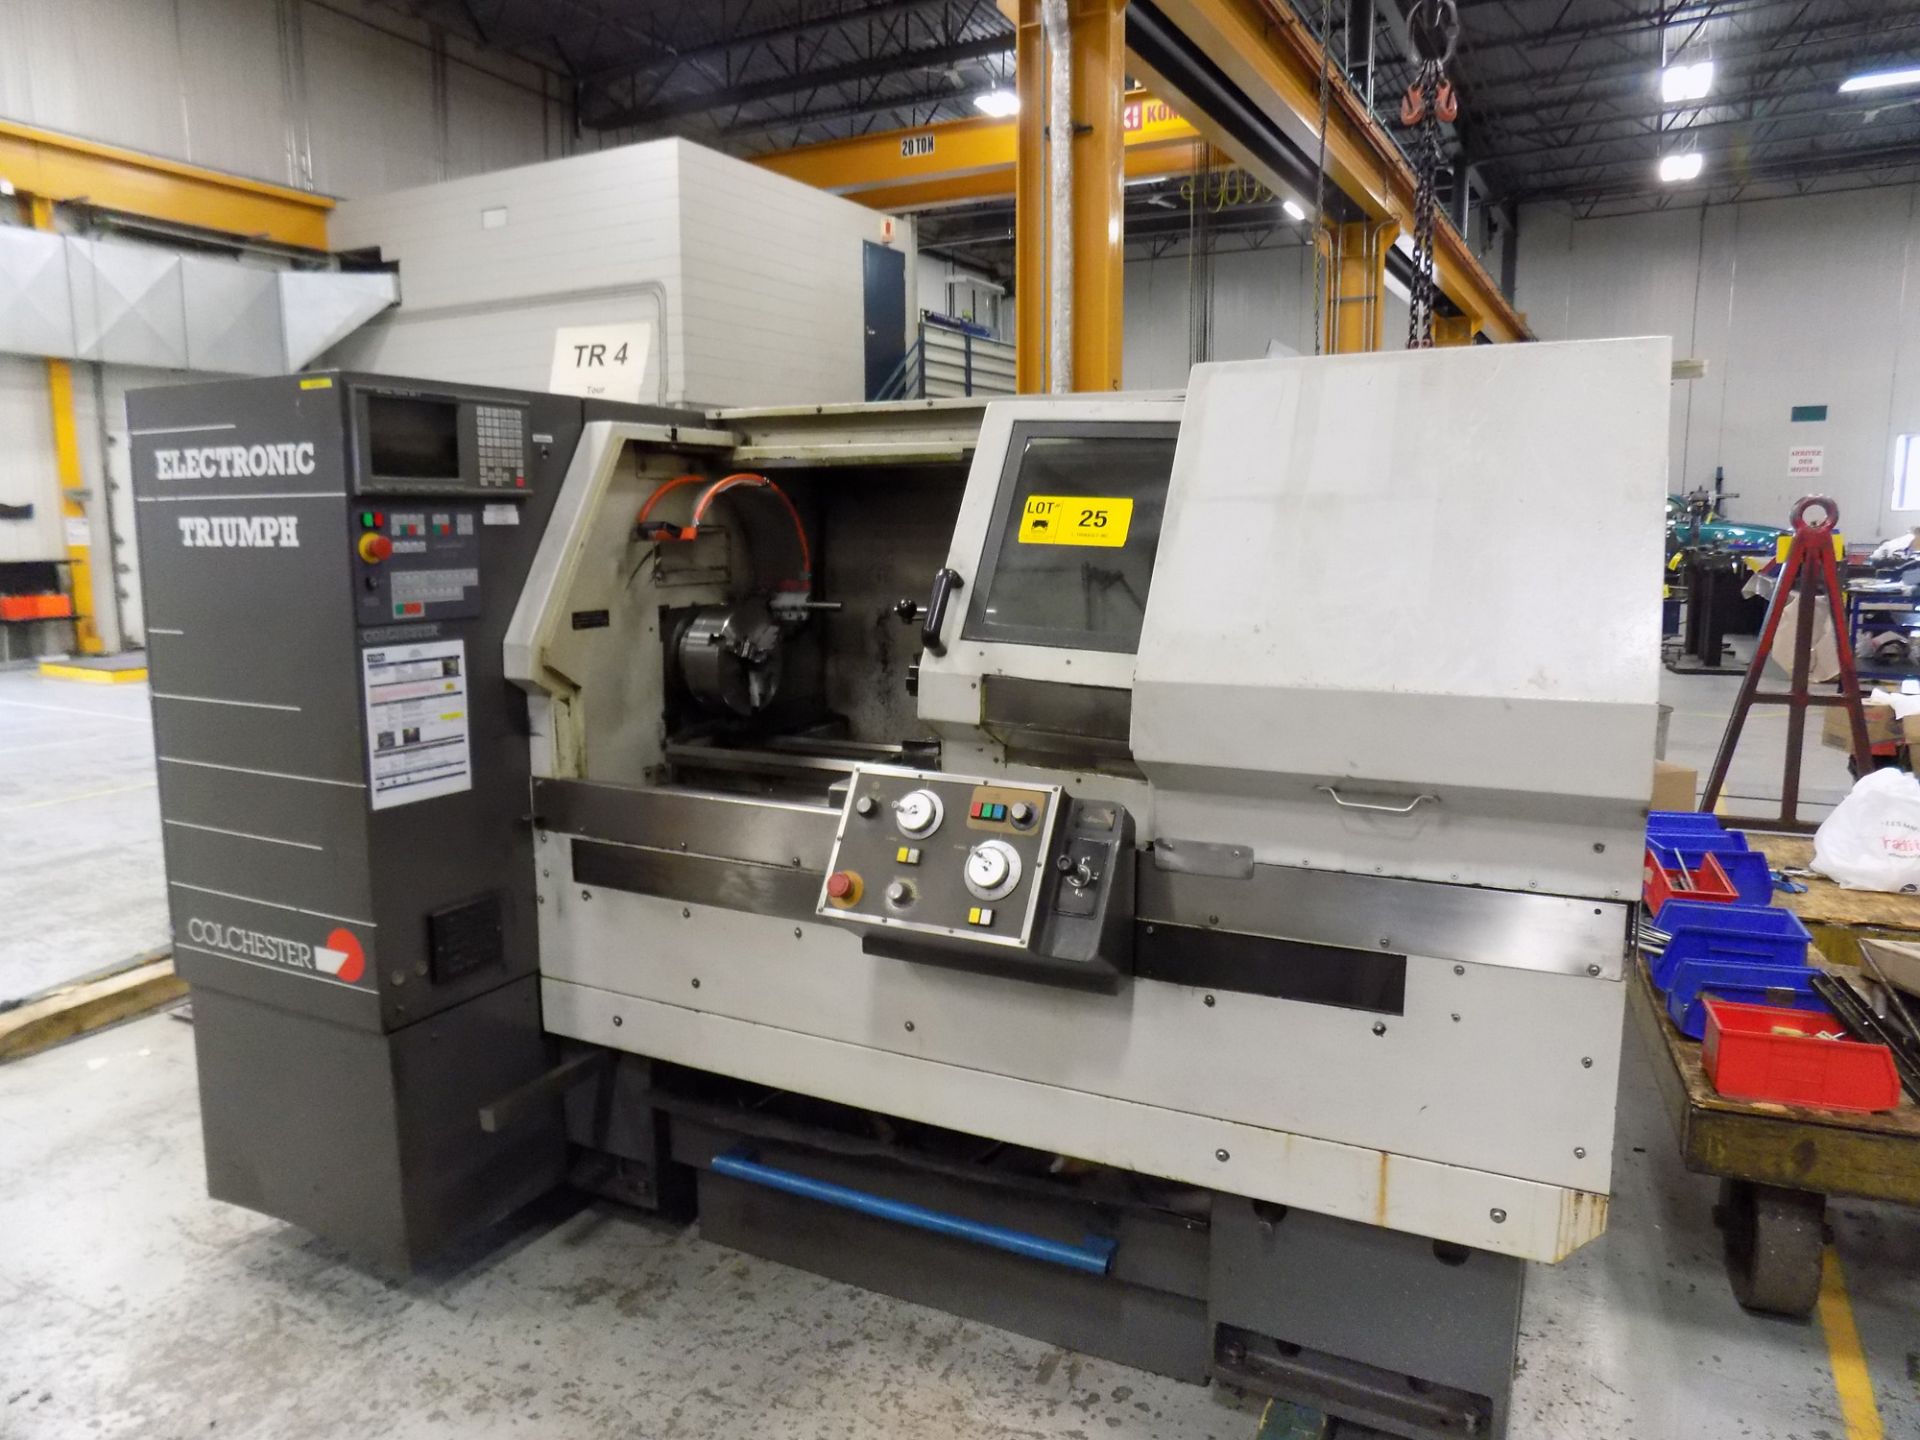 COLCHESTER ELECTRONIC TRIUMPH CNC LATHE WITH FANUC SERIES 20-T CNC CONTROL, 15.75" SWING OVER BED, - Image 2 of 9